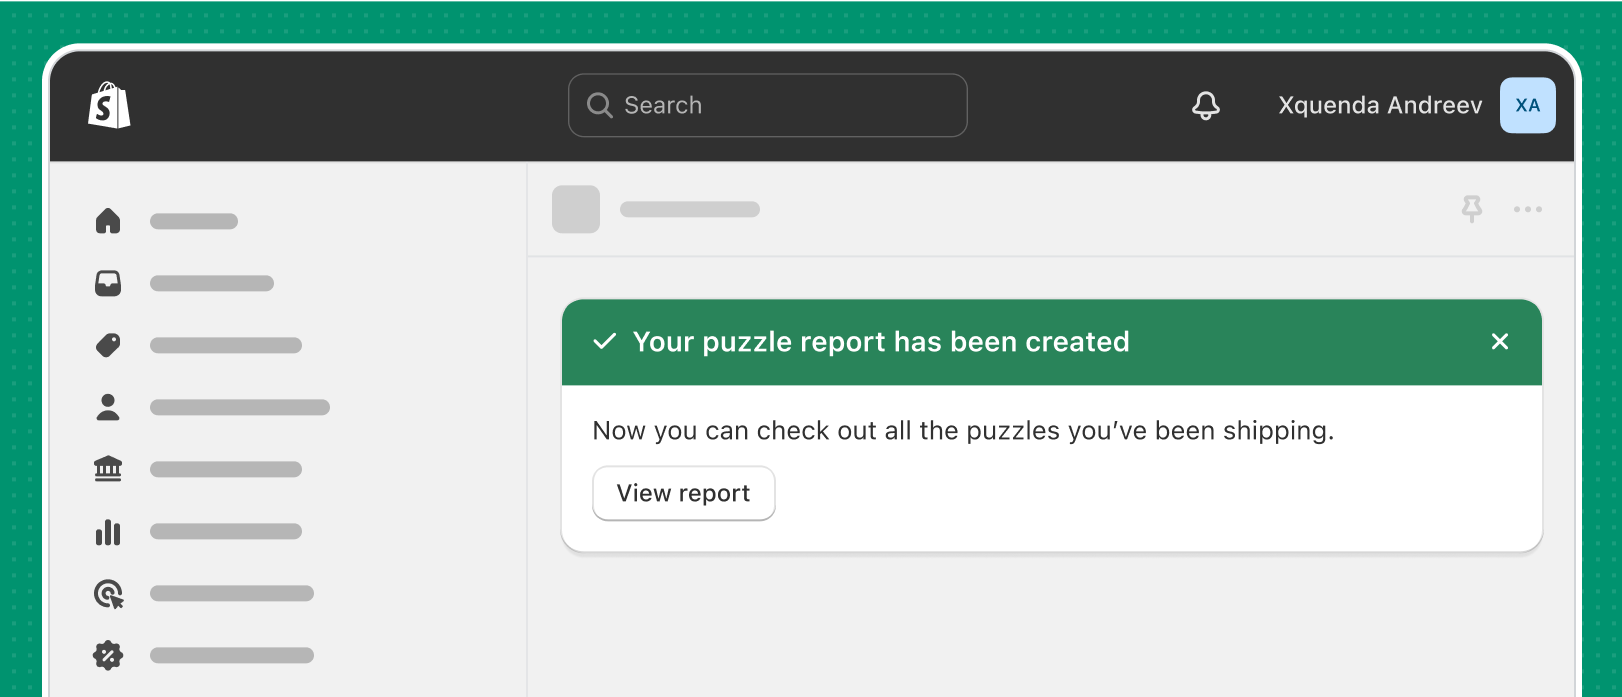 A dismissible success banner in green that reads "Your puzzle has been created" and contains a "View report" button.